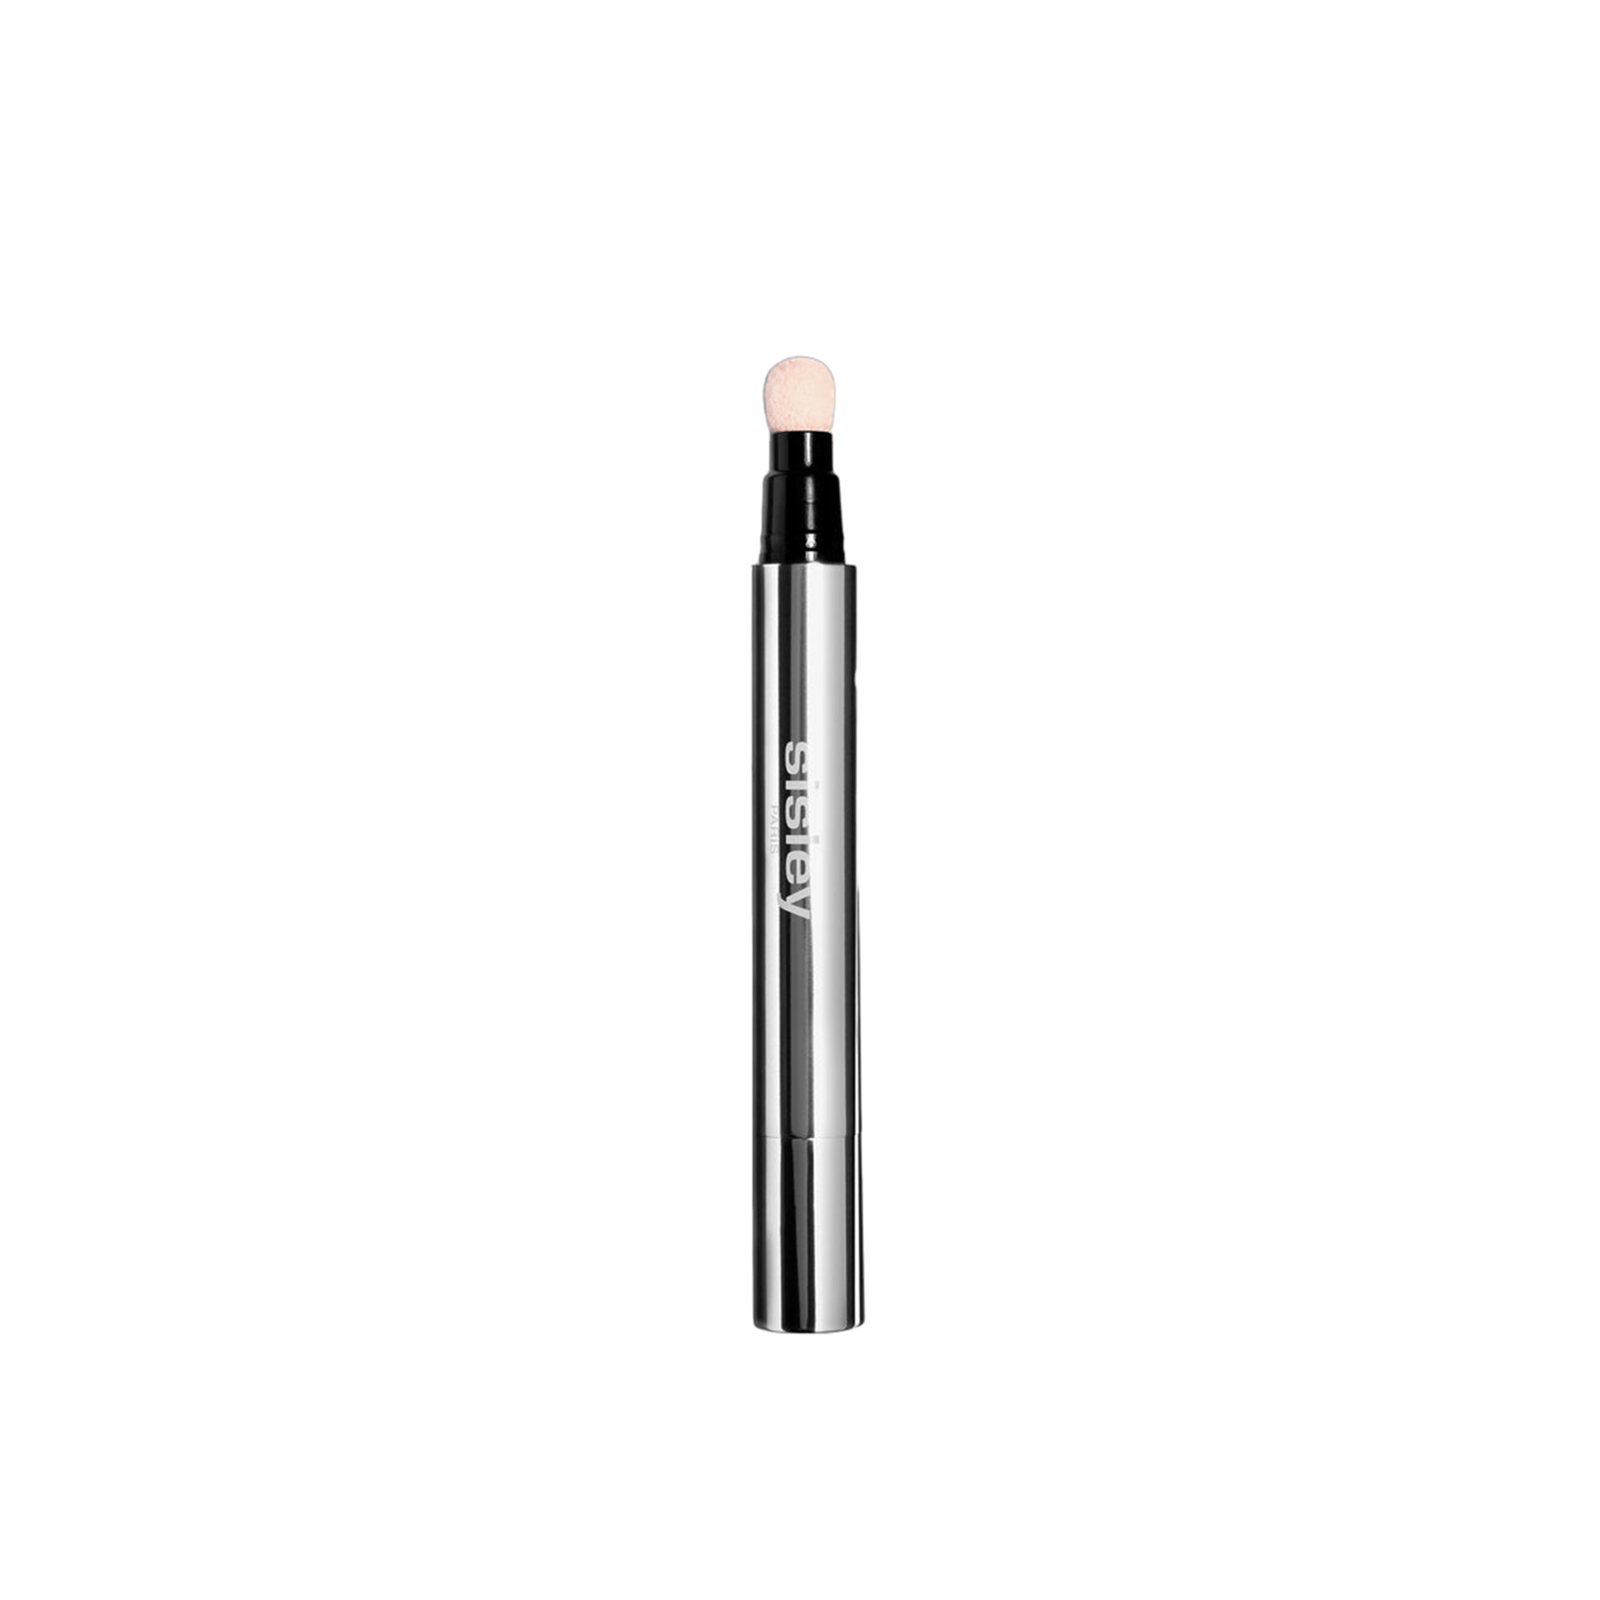 Sisley Paris Stylo Lumière Instant Radiance Booster Pen 1 Pearly Rose 2.5ml